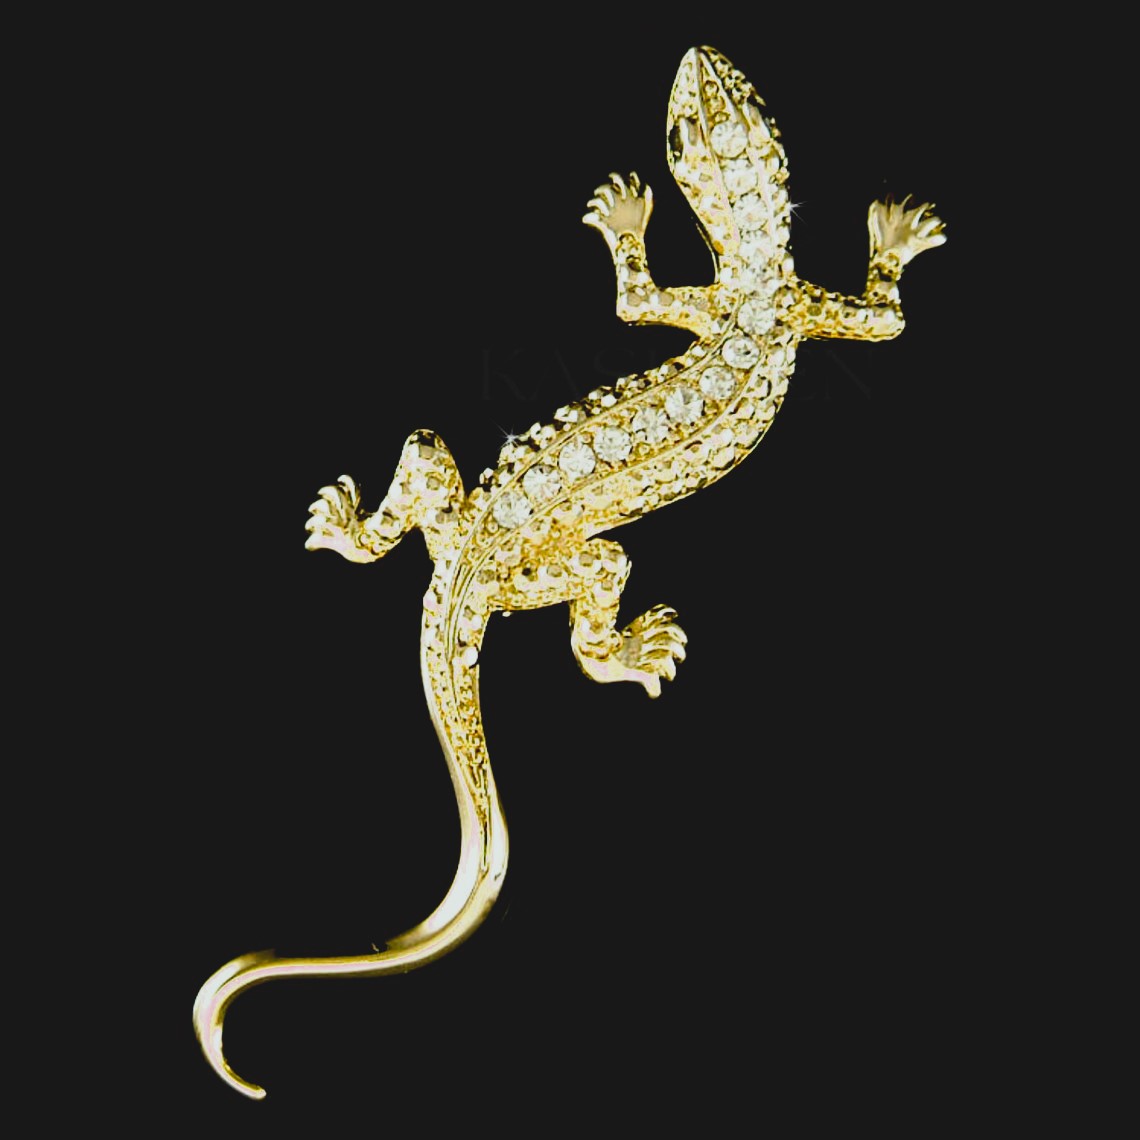 A brooch/pin of a lizard that is gold